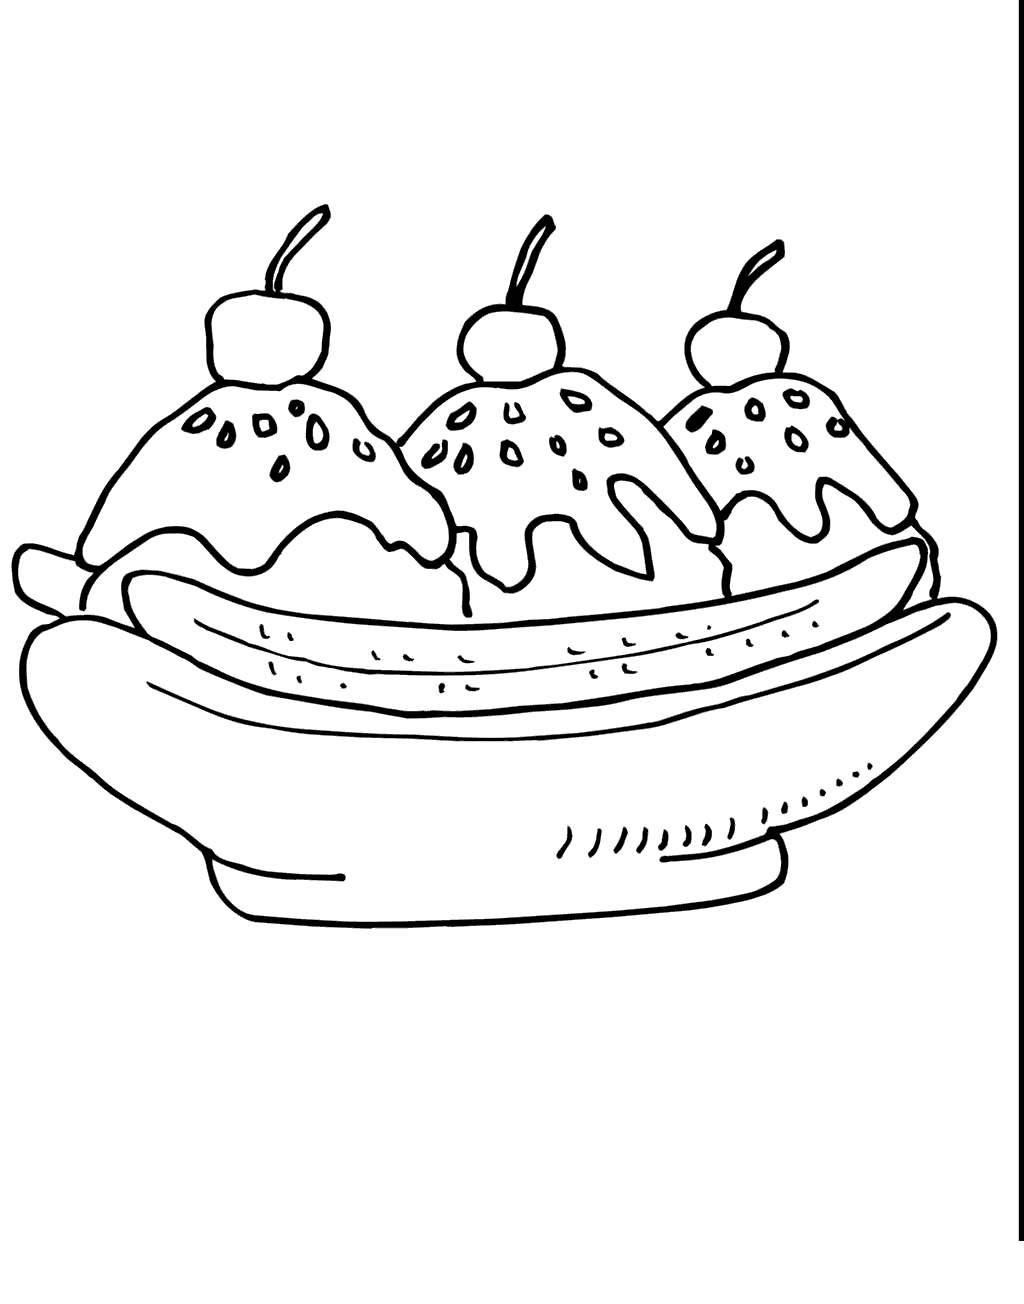 Banana Split Coloring Page Banana Split Coloring Pages Archives Page 3 Of 3 Kidcolorings